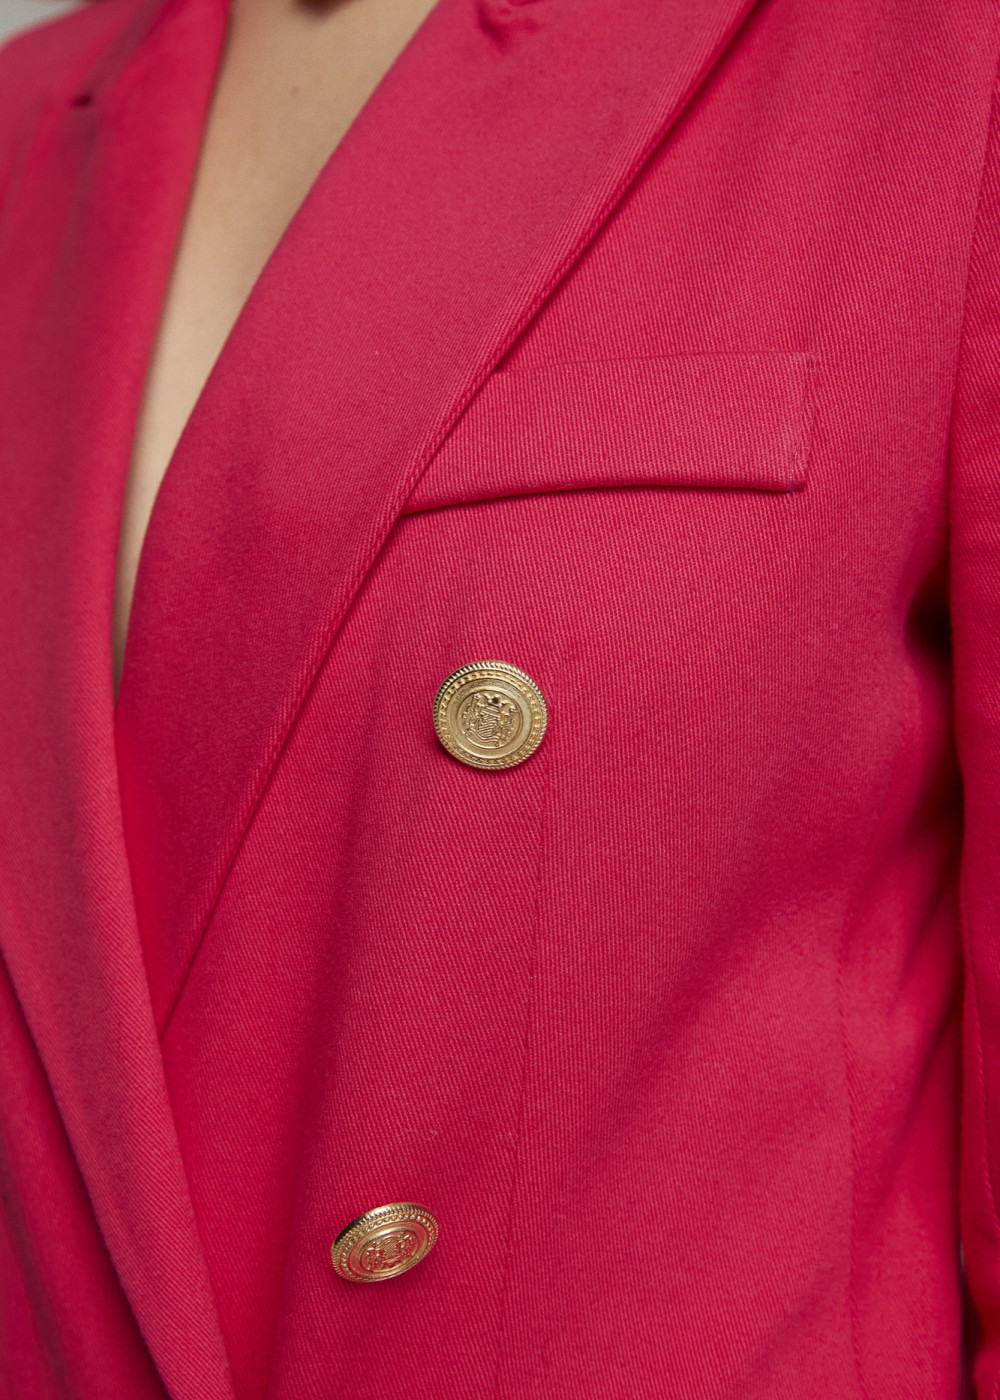 Button Detailed Blazer Jacket and Draped Skirt